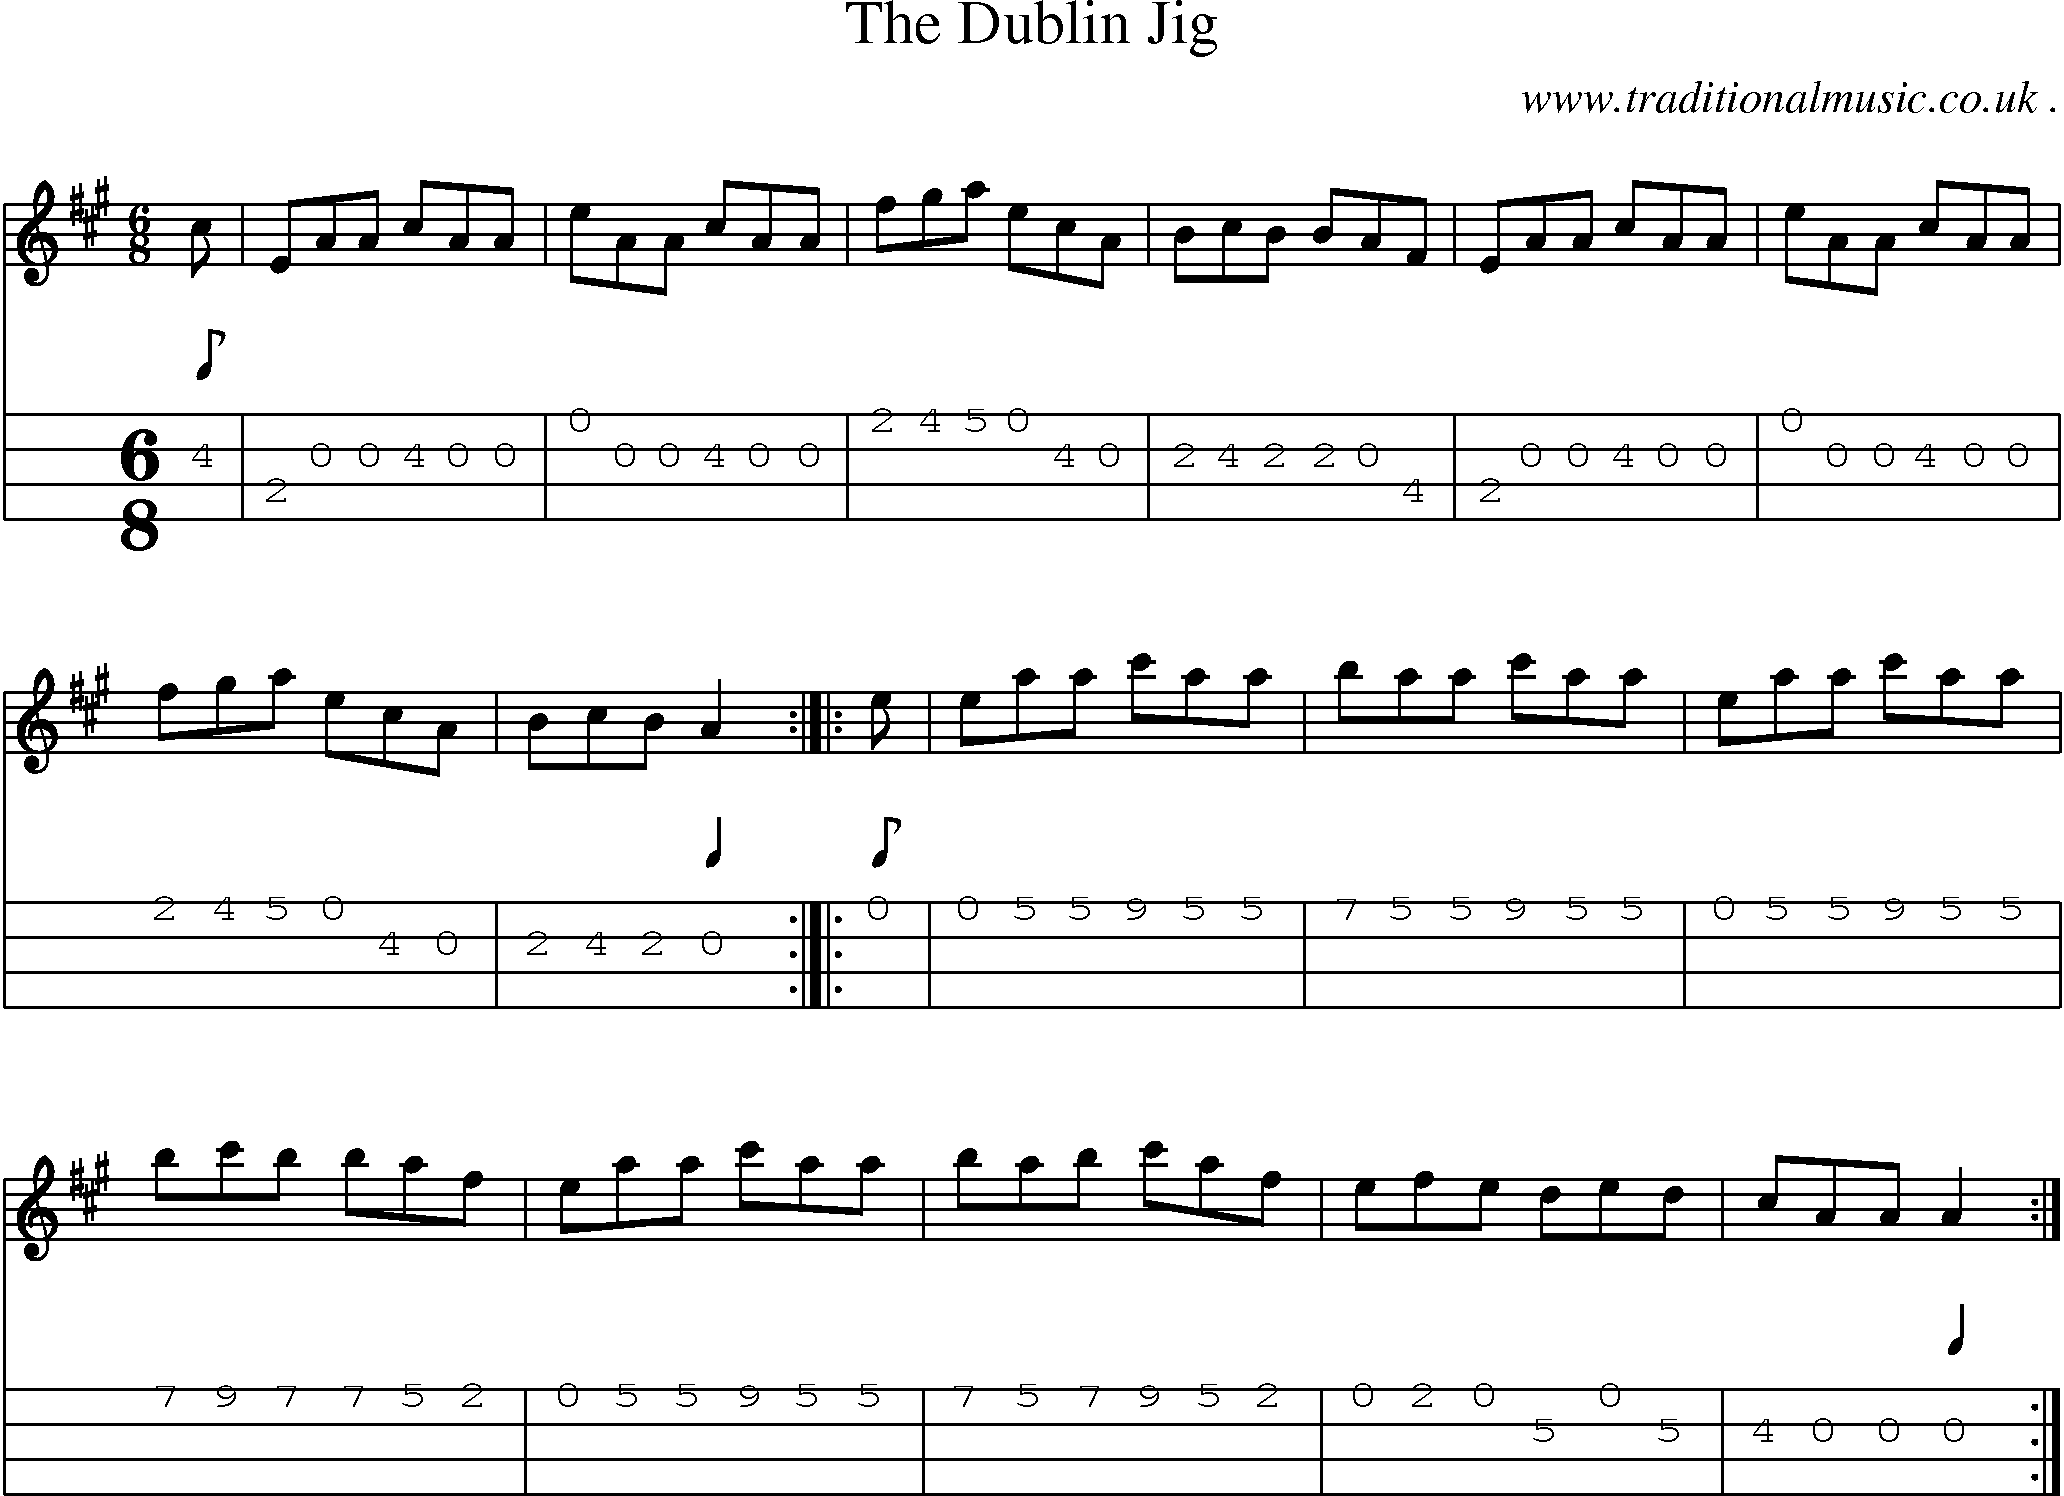 Sheet-music  score, Chords and Mandolin Tabs for The Dublin Jig